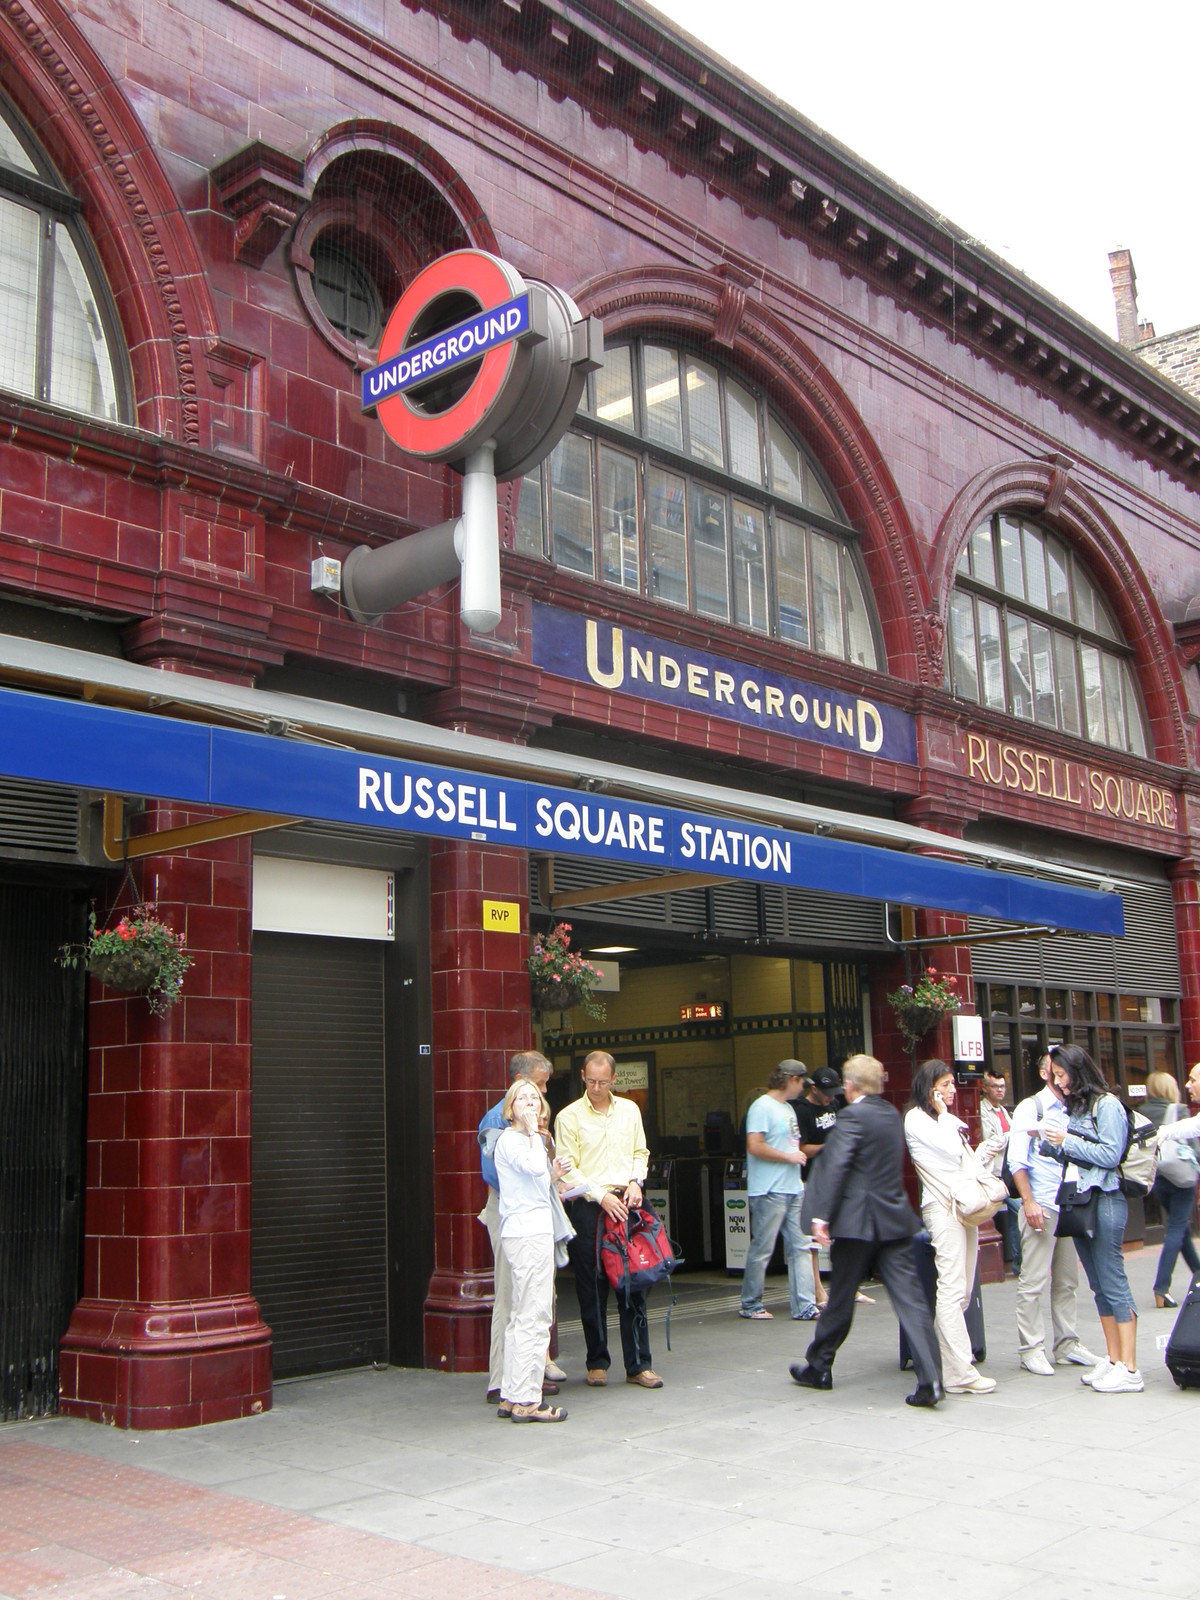 Russell Square station